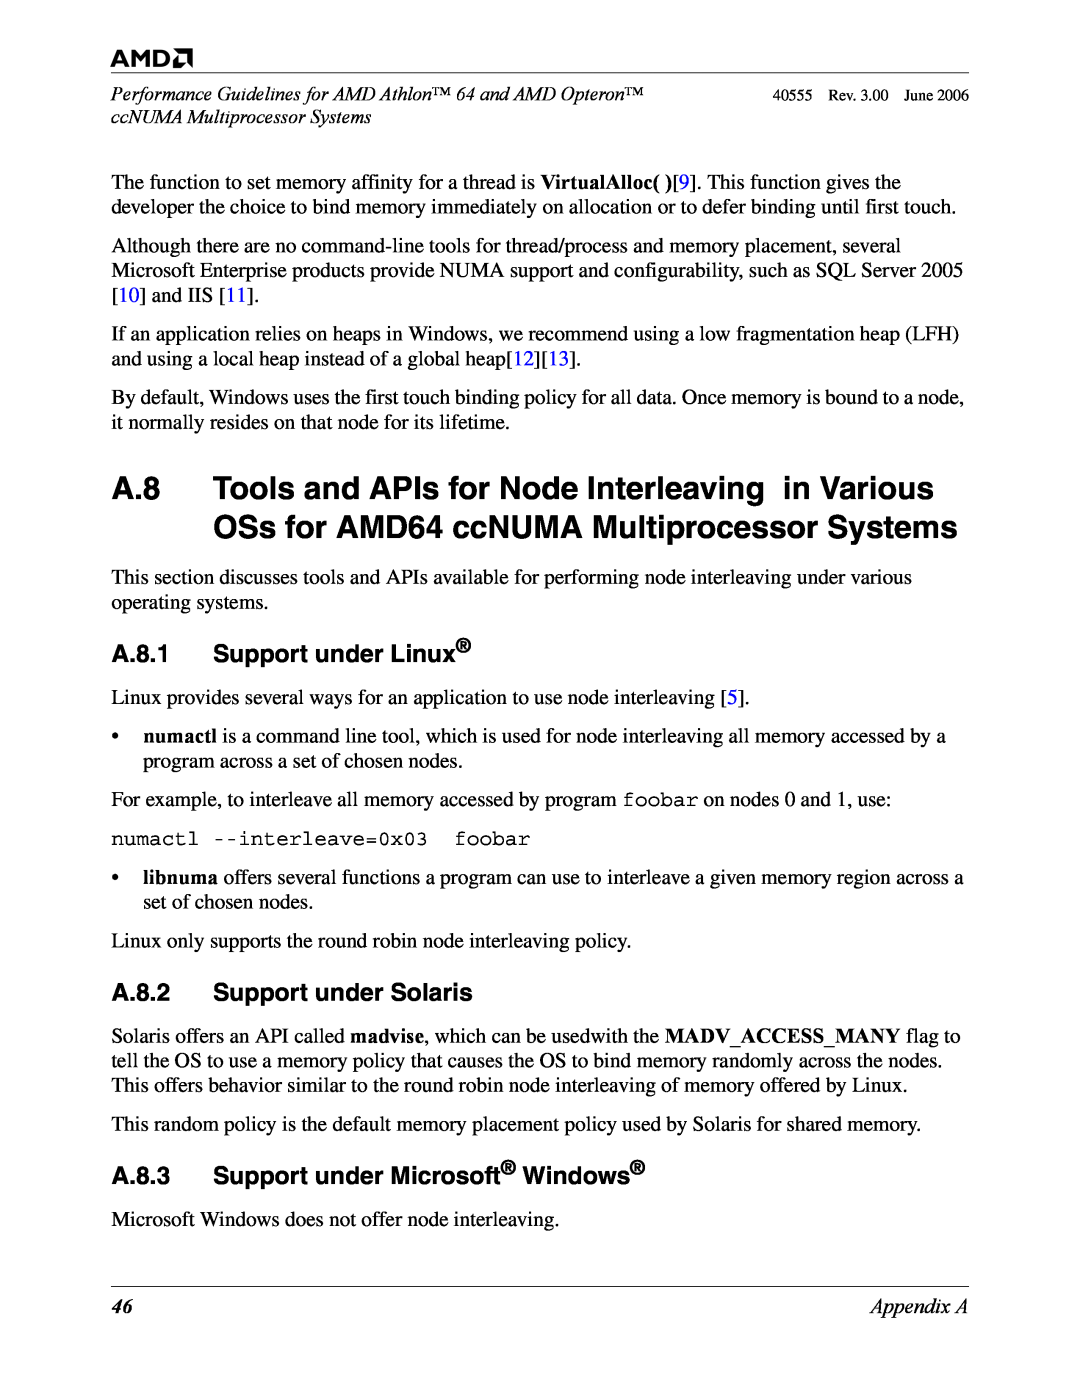 AMD 64 manual A.8.1 Support under Linux, A.8.2 Support under Solaris, A.8.3 Support under Microsoft Windows 